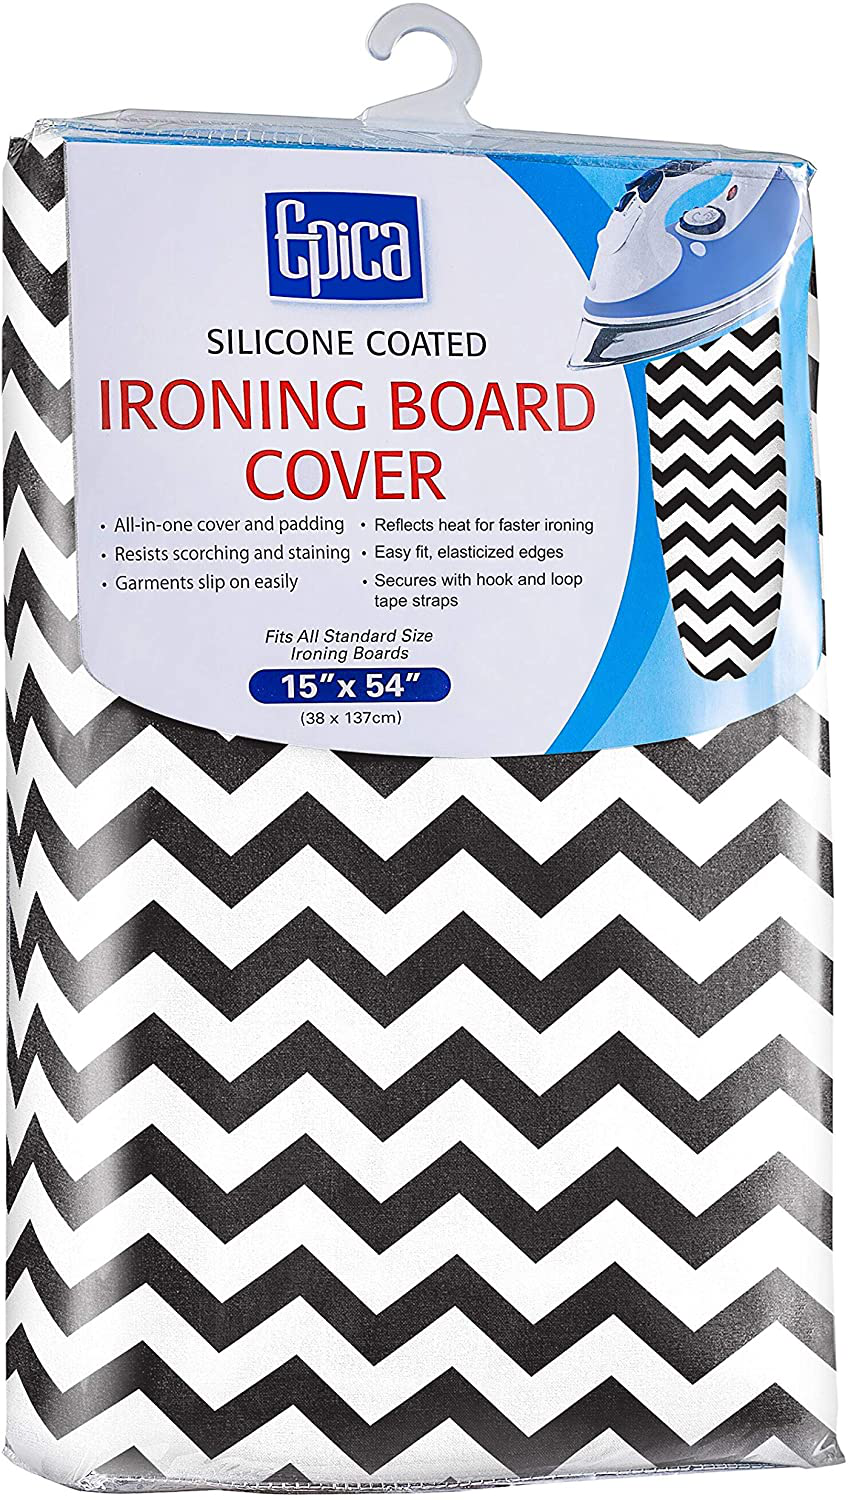 Epica Silicone Coated Ironing Board Cover- Resists Scorching and Staining - 15" x54 (Scroll Beige)